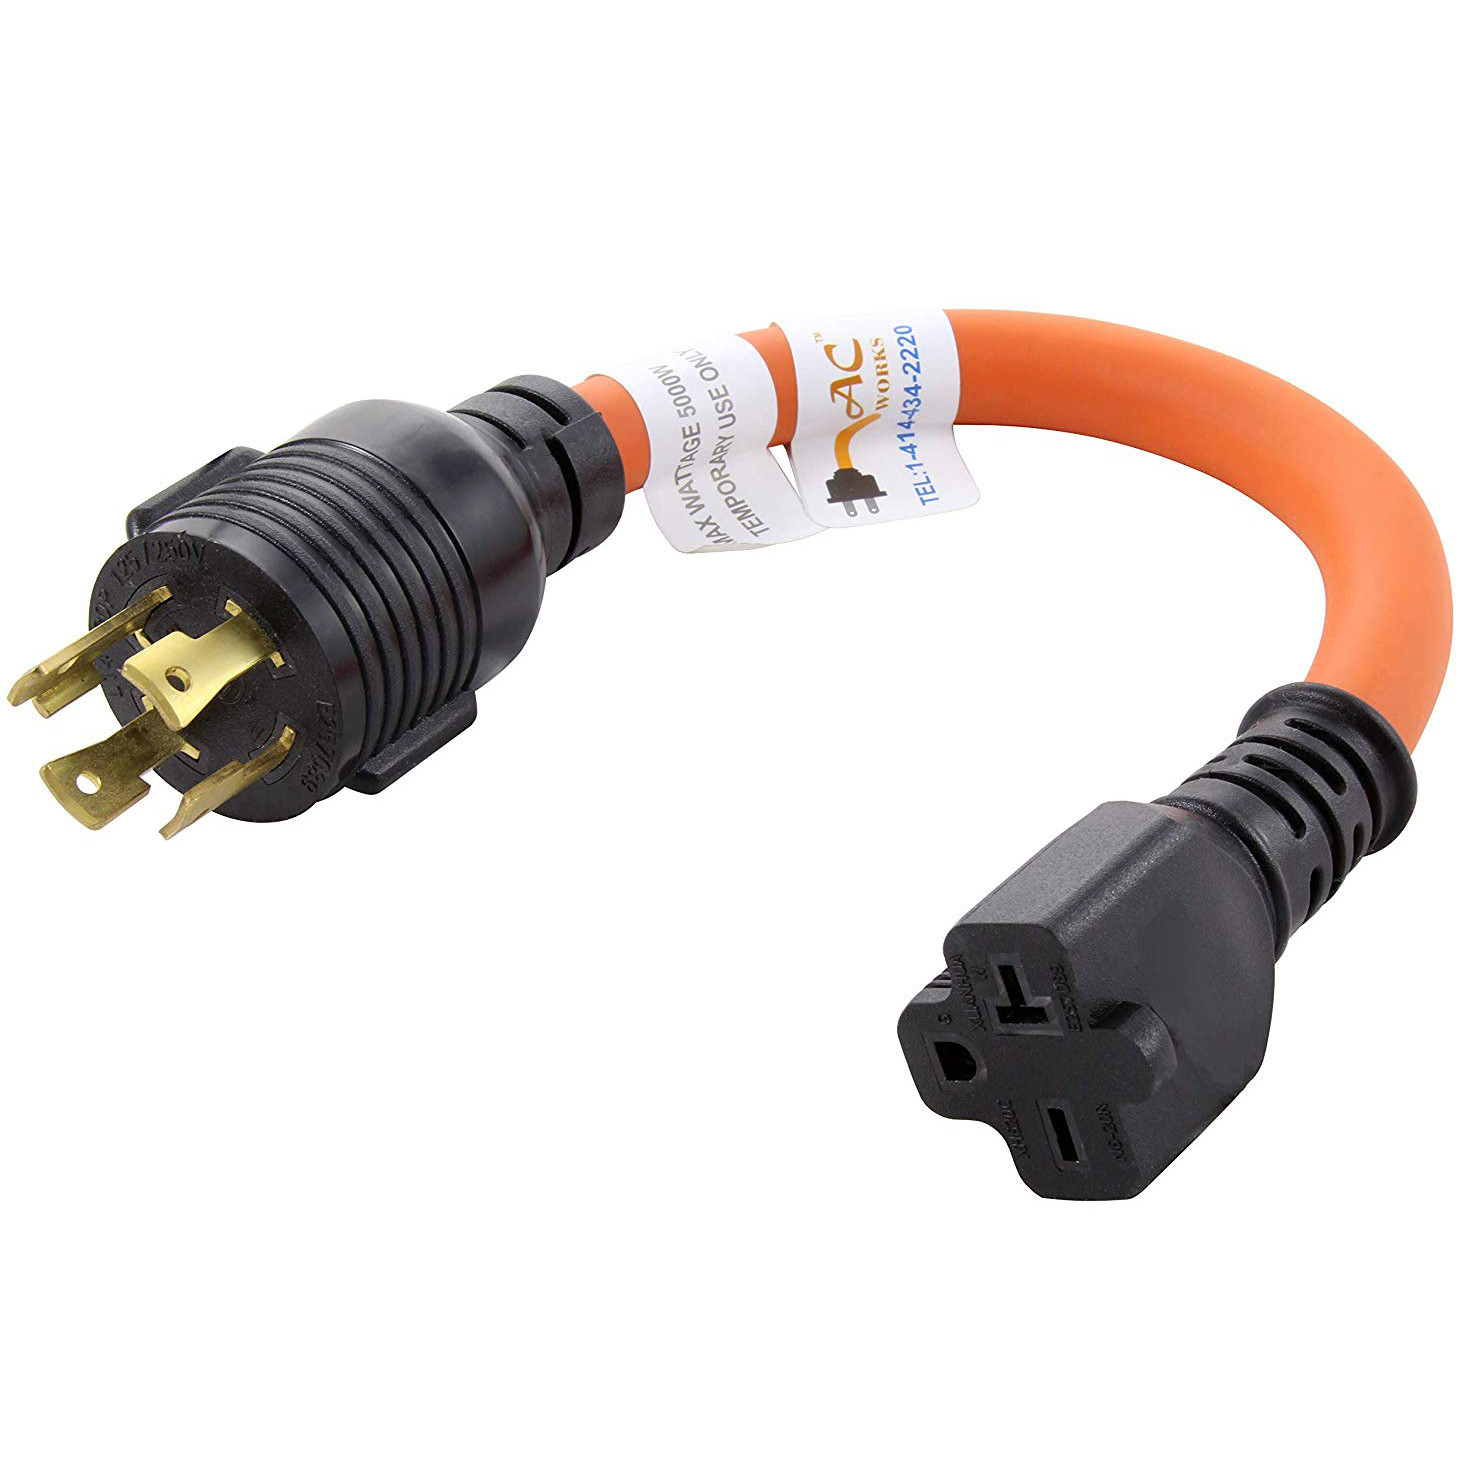 L14-30P 30 Amp 125/250V Locking Plug to 6-15/20R T Blade 15/20A 250 Volt Connector Custom Length Cable